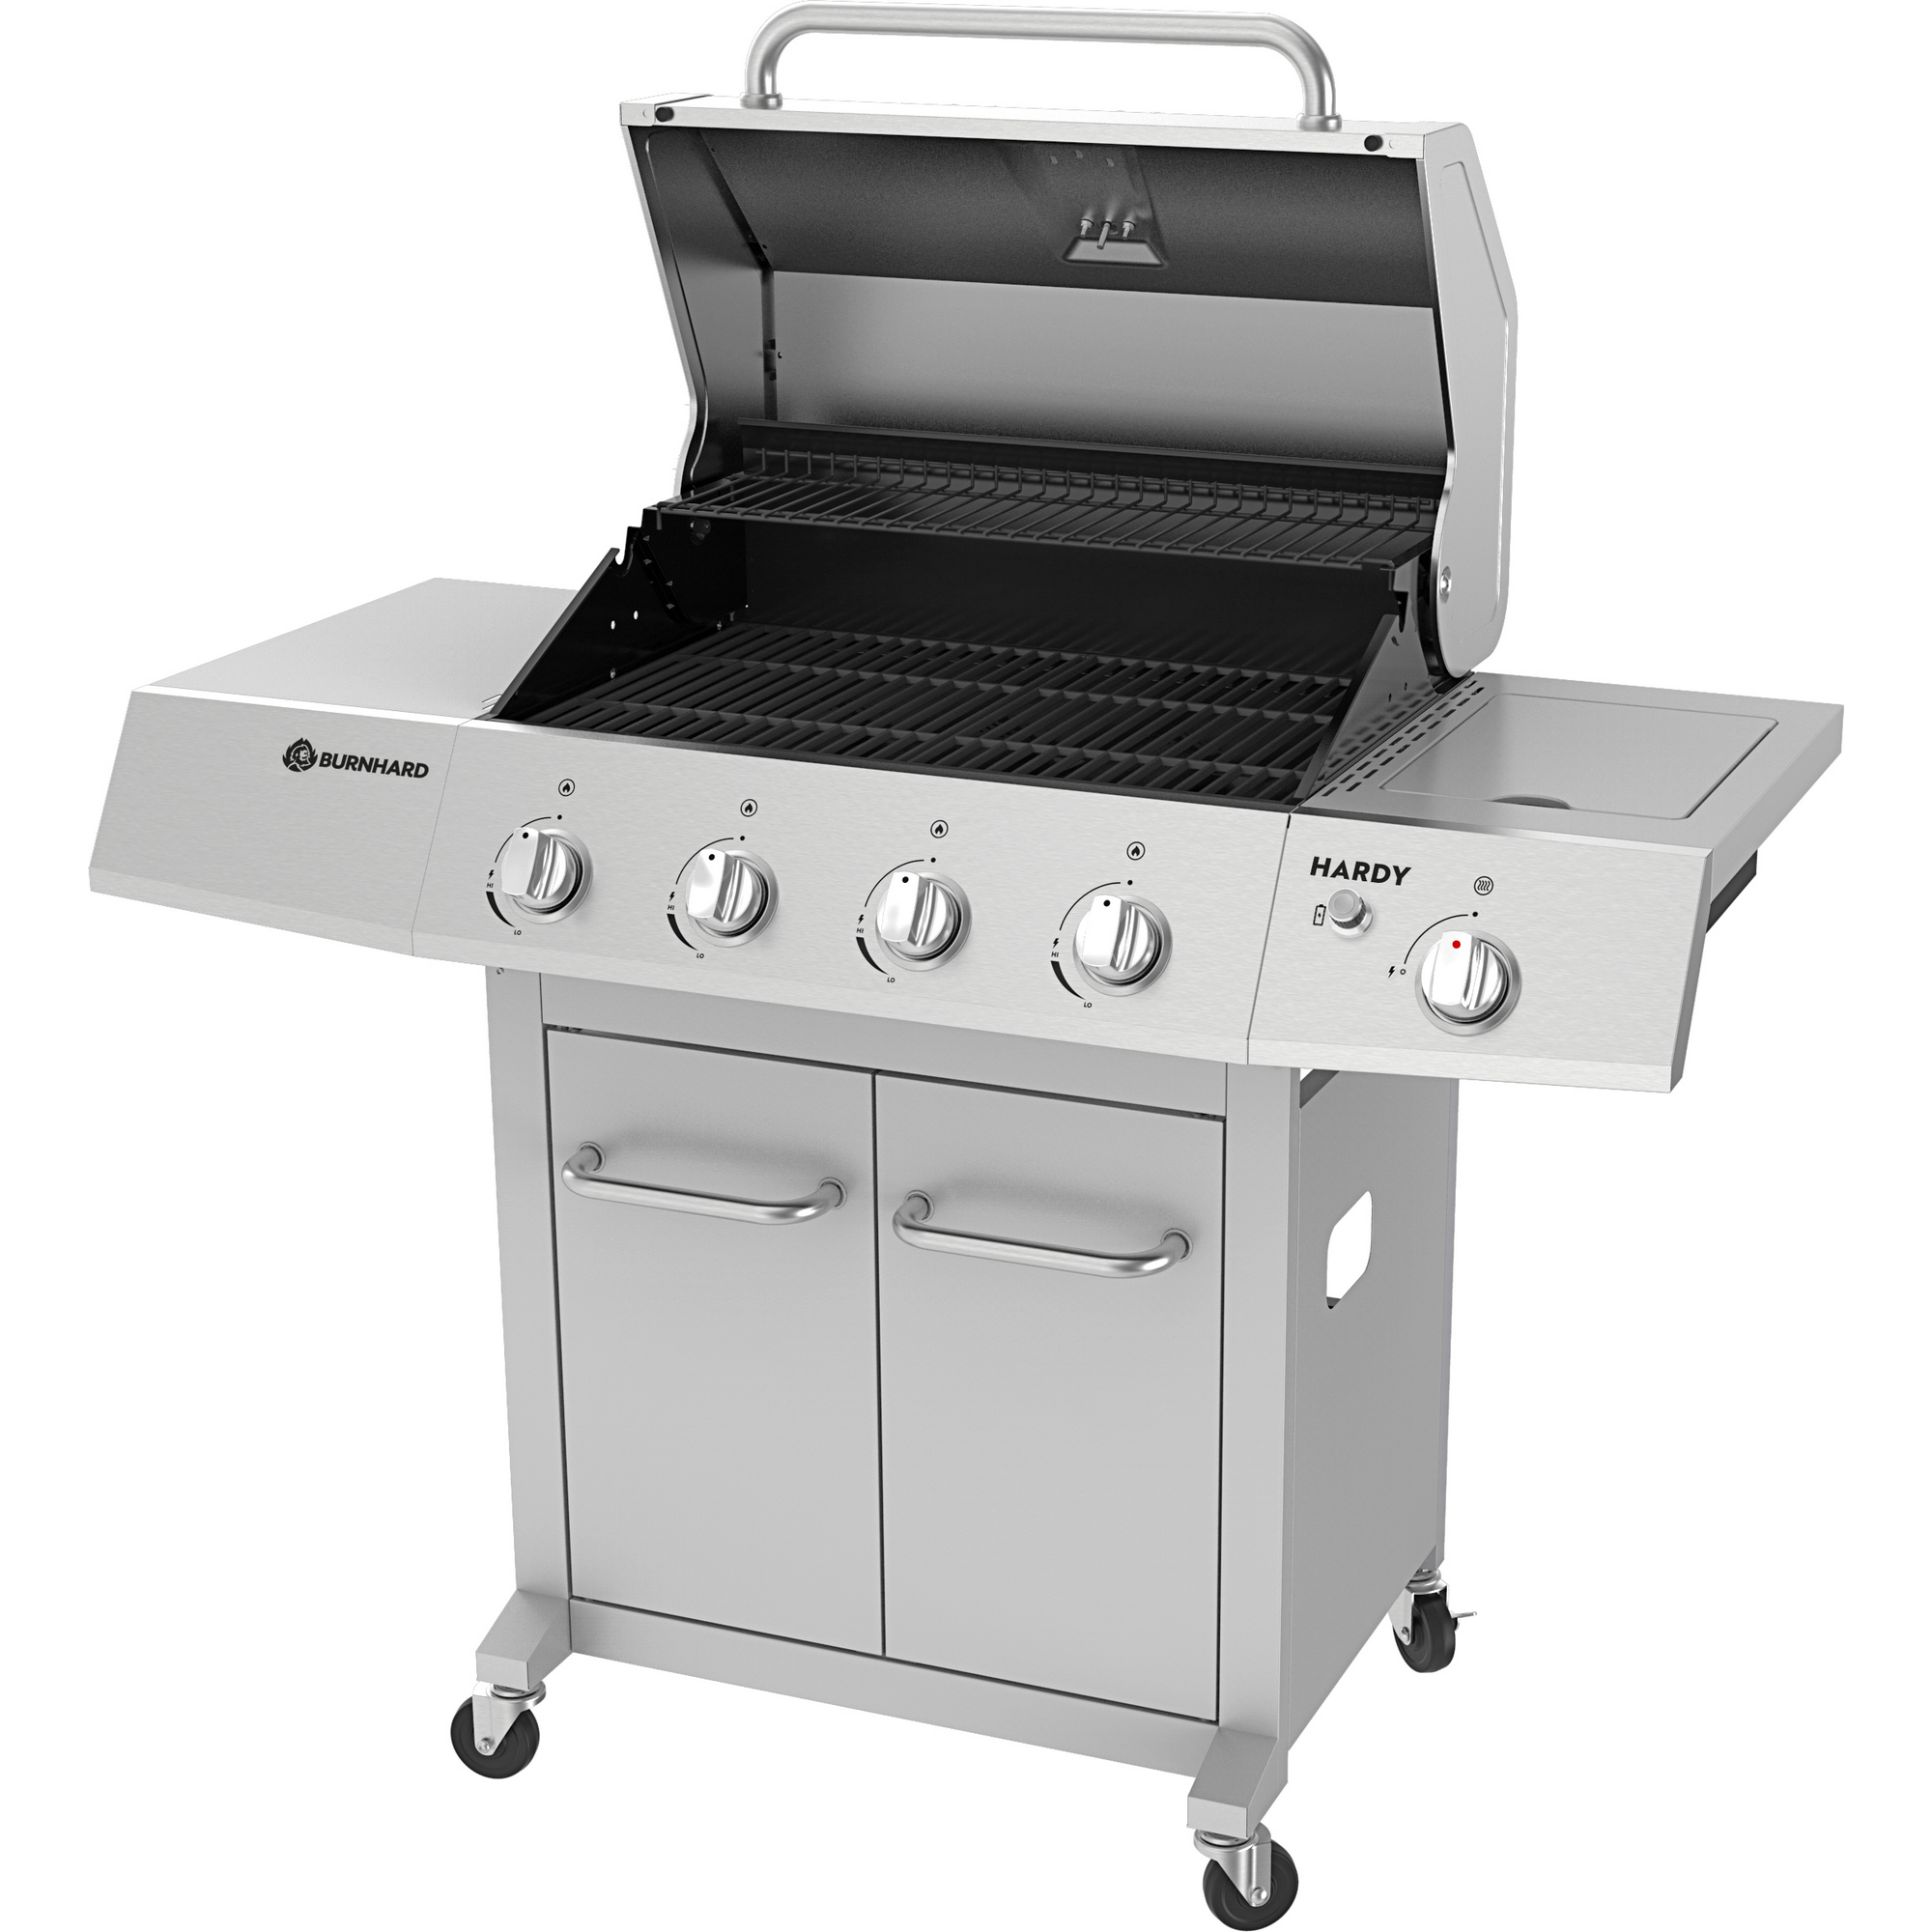 Gasgrill 'Hardy' 5 Brenner, silbern + product picture